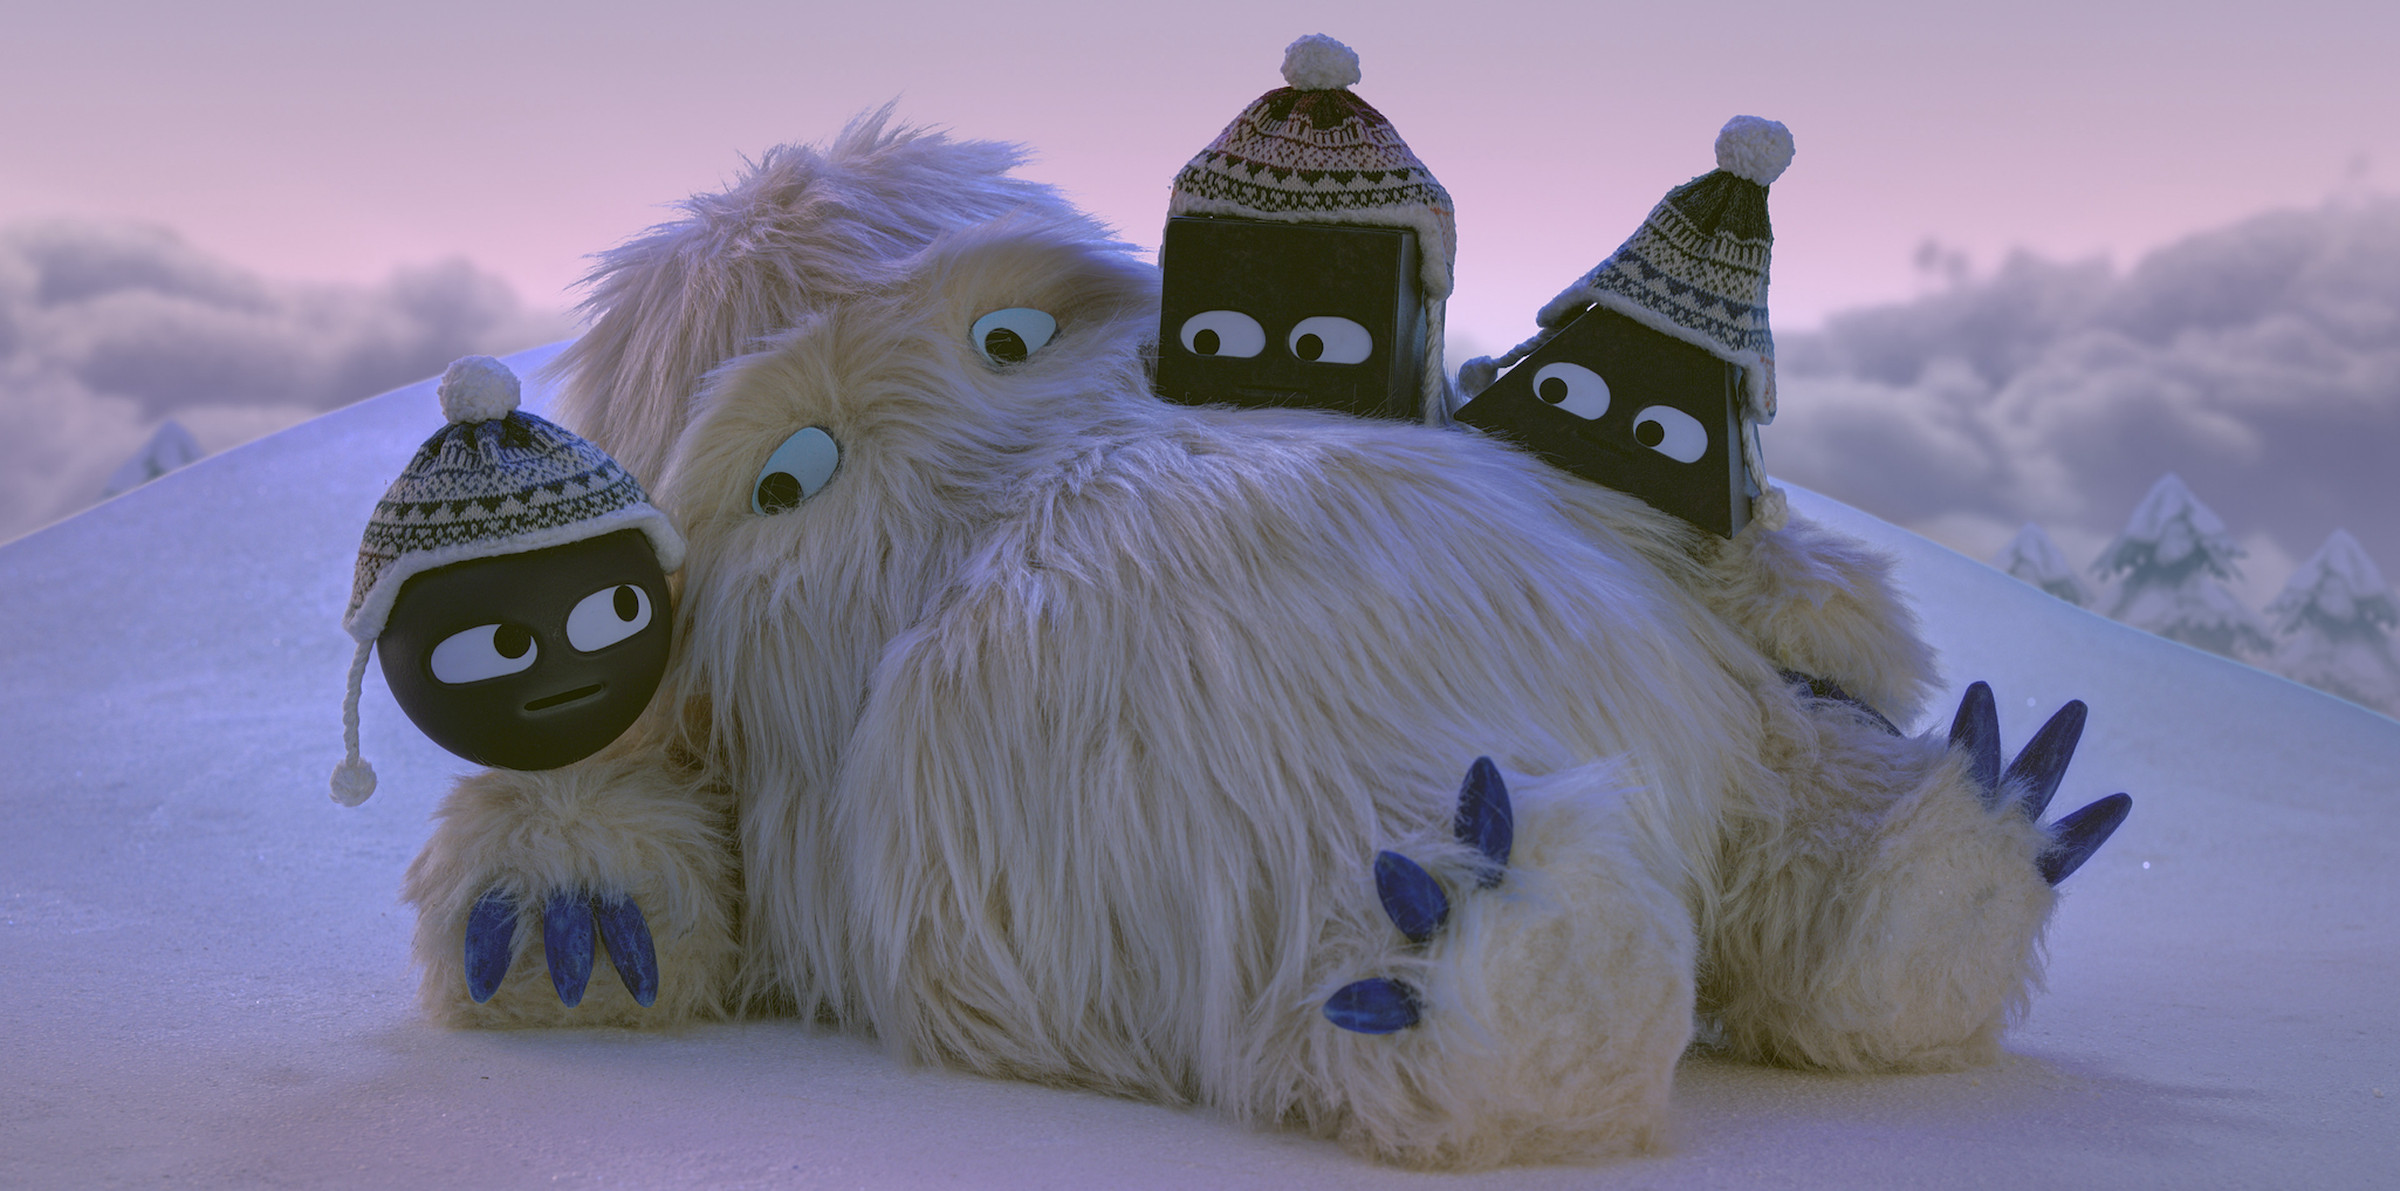 A picture from Shape Island, showing three black shapes with eyes and knit caps on sitting on a yeti, which is laying on the snowy ground. He is very shaggy.